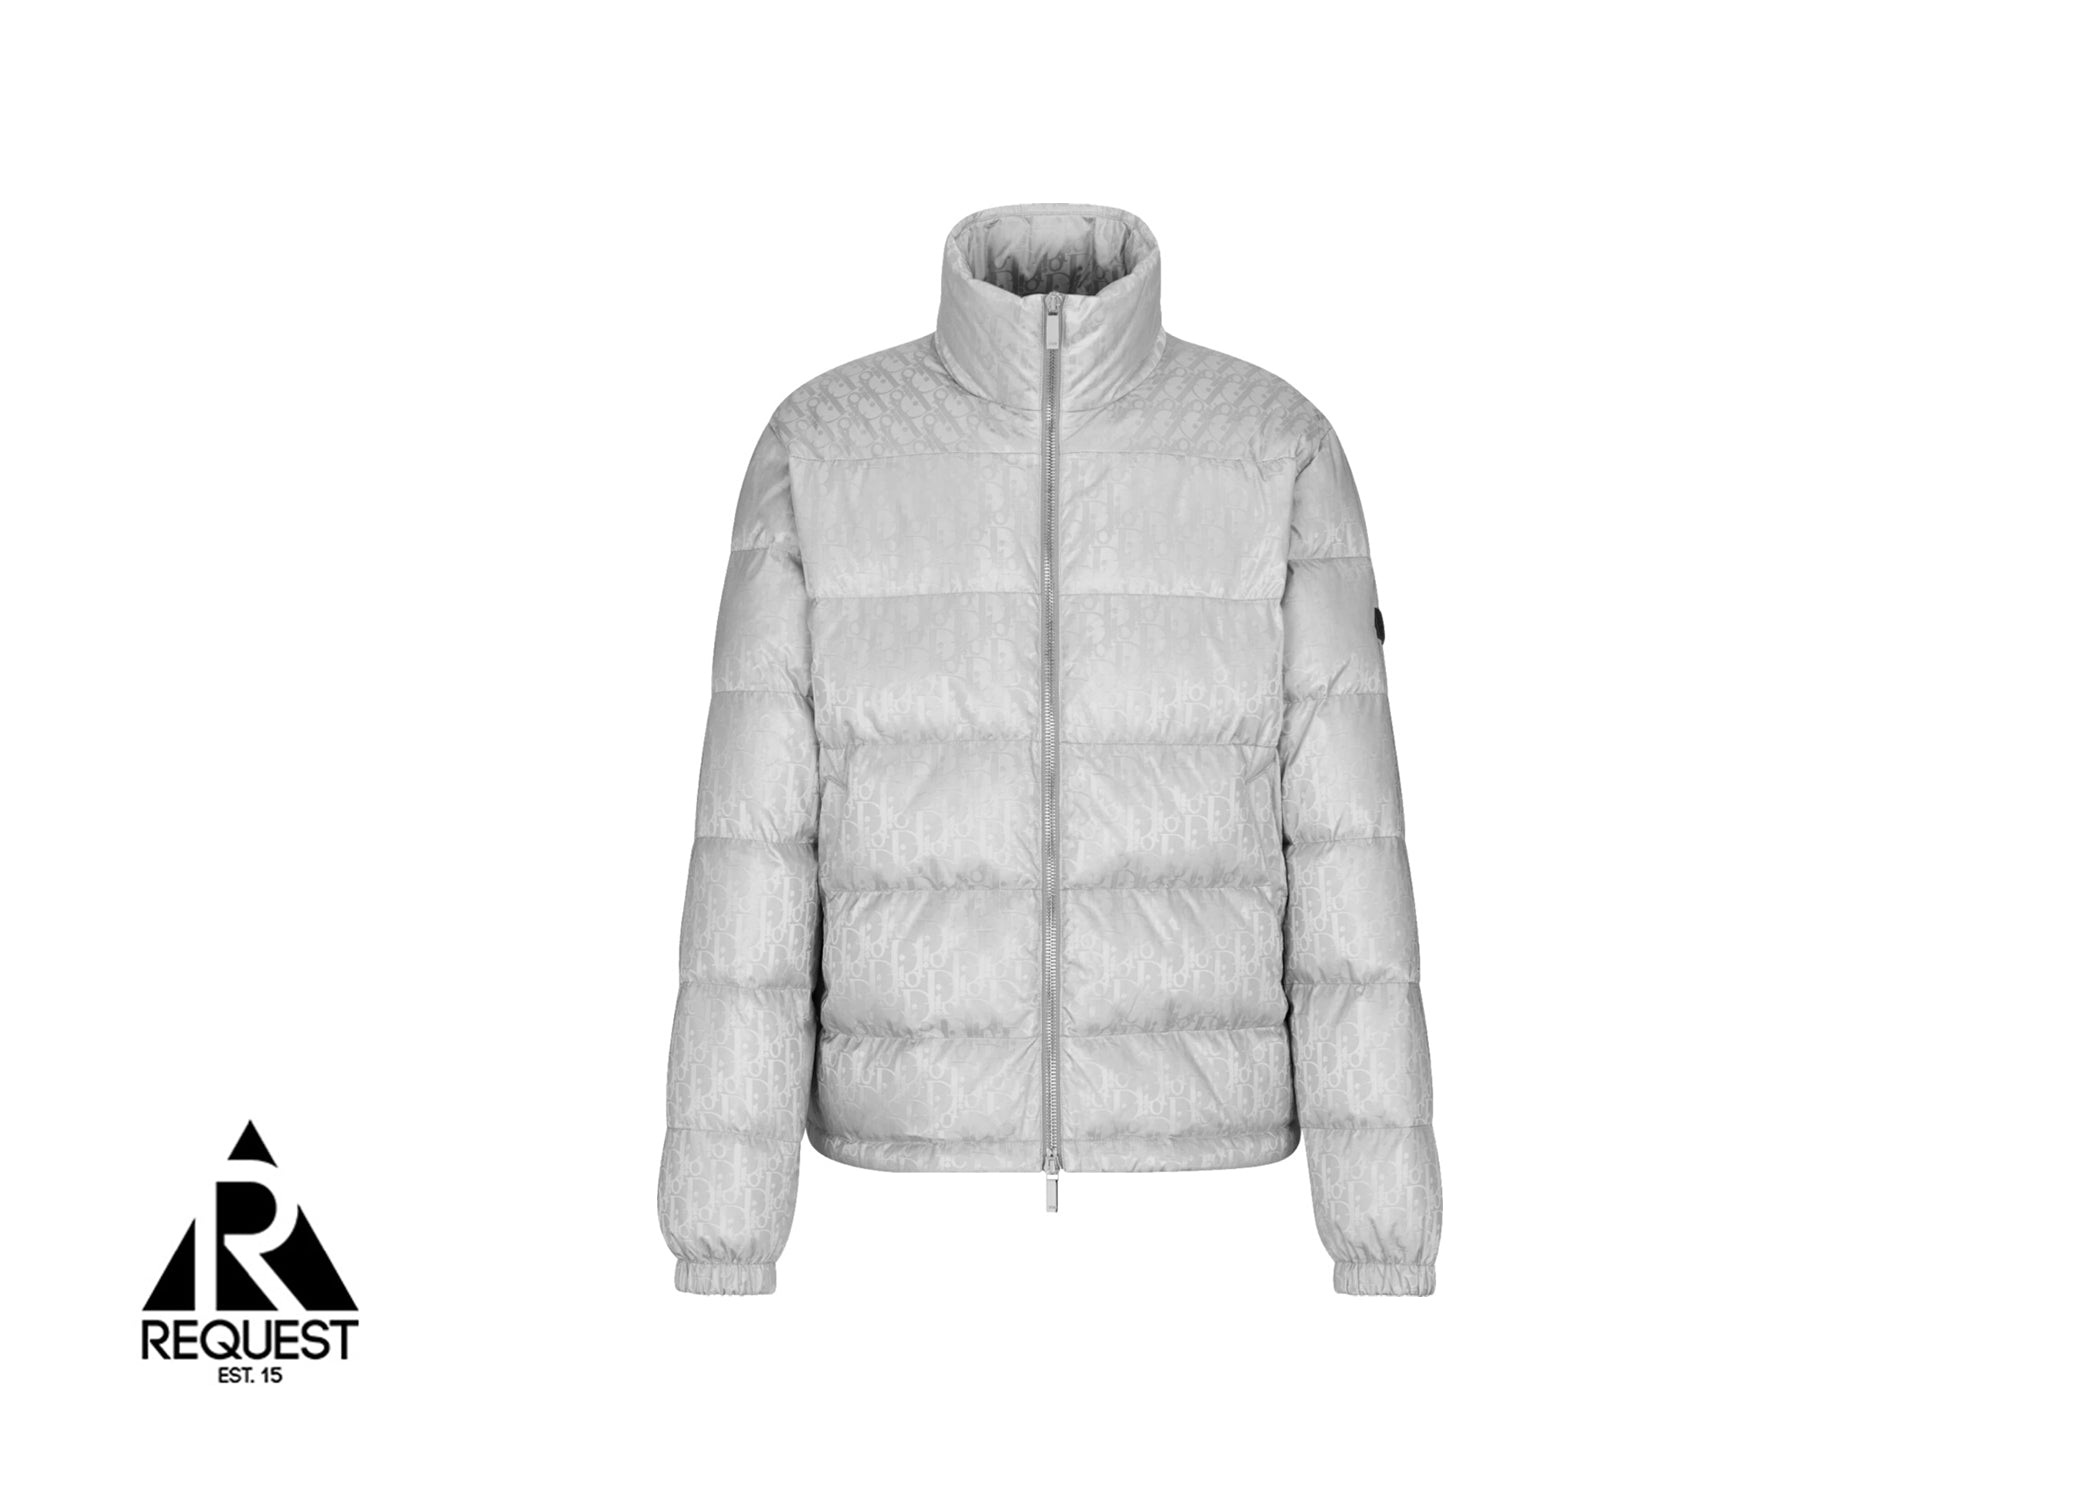 Aztec Clothing - Dior Grey Oblique Puffer Jacket - Shop New SS21 Online!  ——— Spread The Cost In 3 Monthly Instalments With Klarna No Fees ———  www.Aztec-Clothing.com #Dior